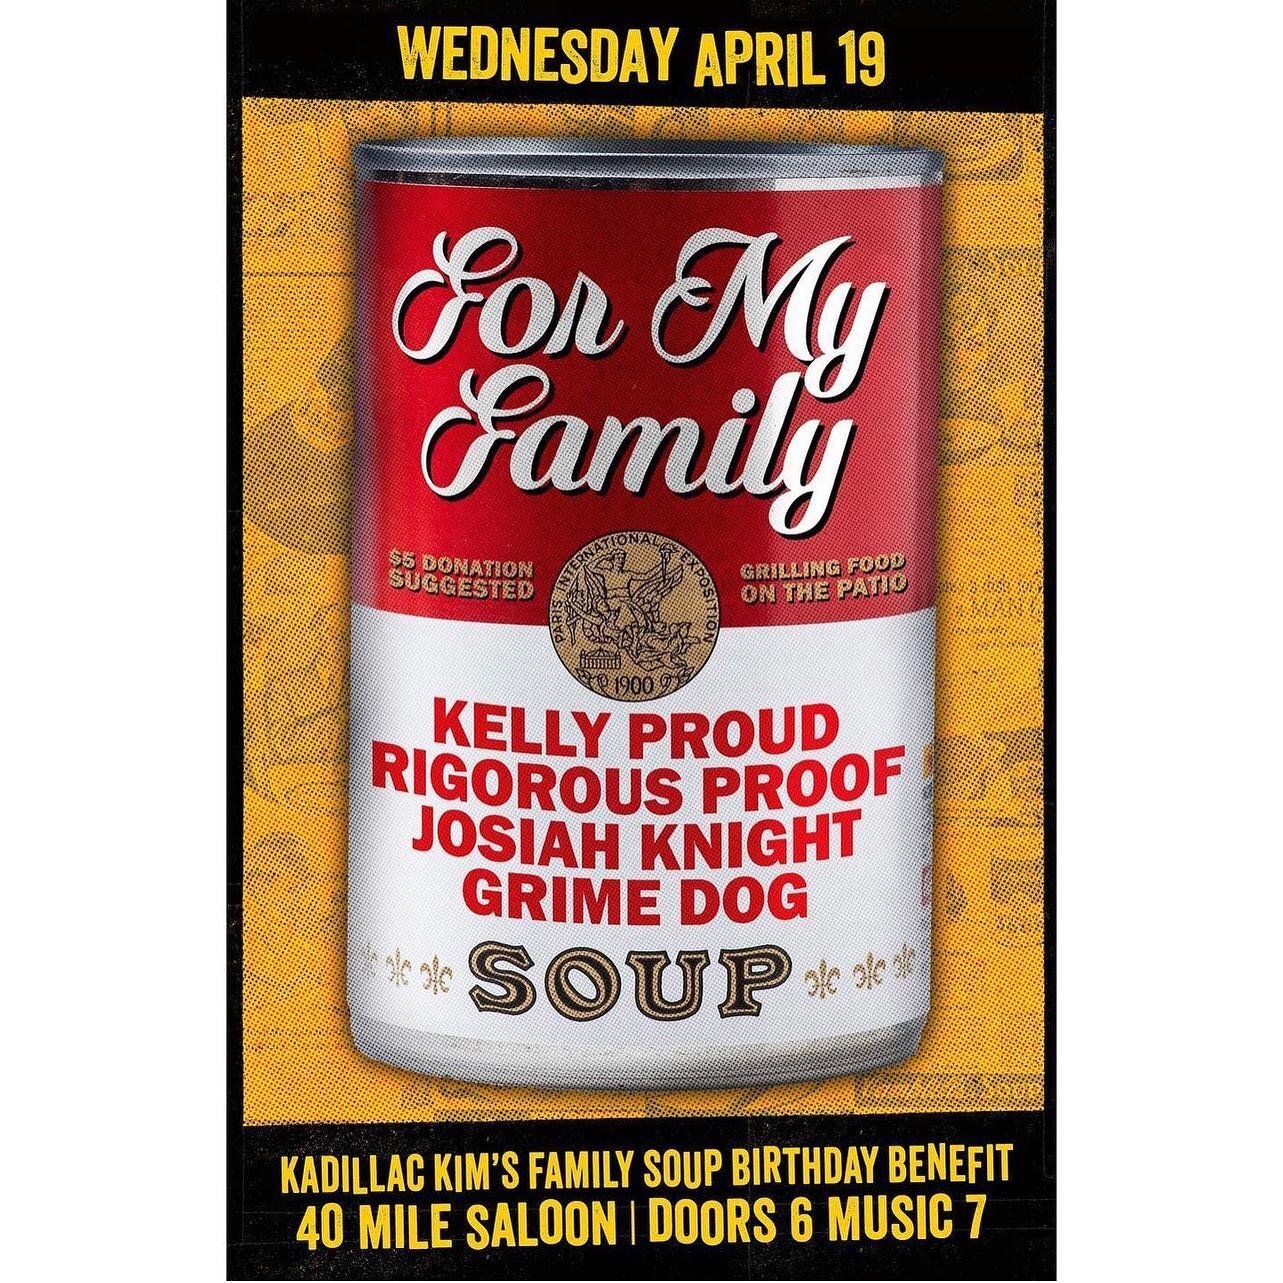 Tonight at 40 Mile! Come on down and support @familysoupmutualaid and sing happy birthday to Kadillac Kim! 🖤🔥